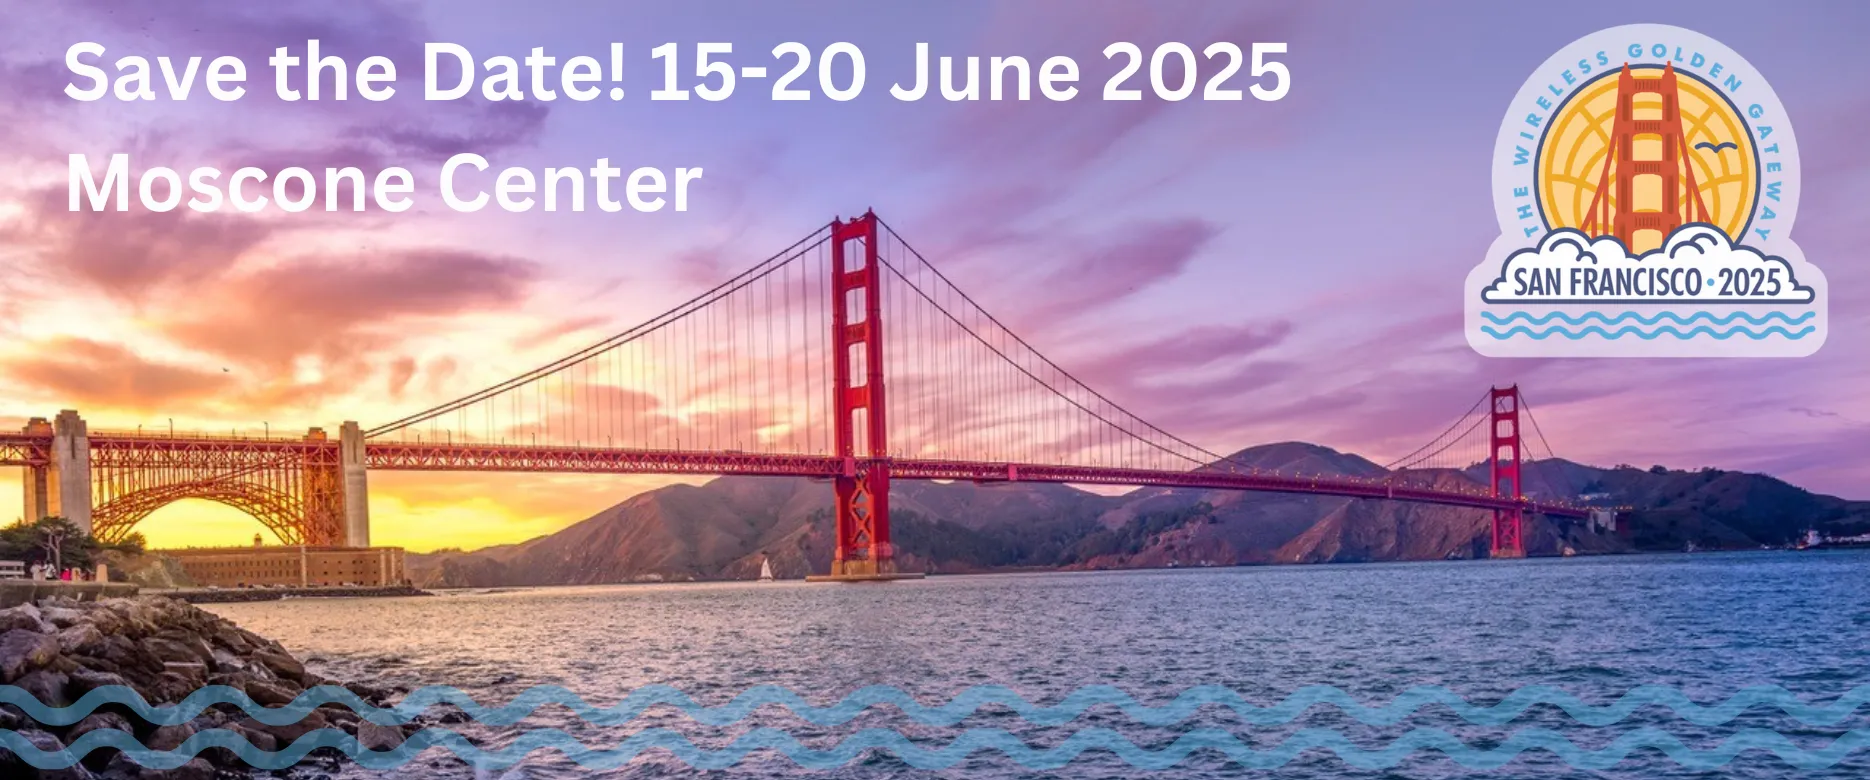 Save the Date! 15-20 June 2025